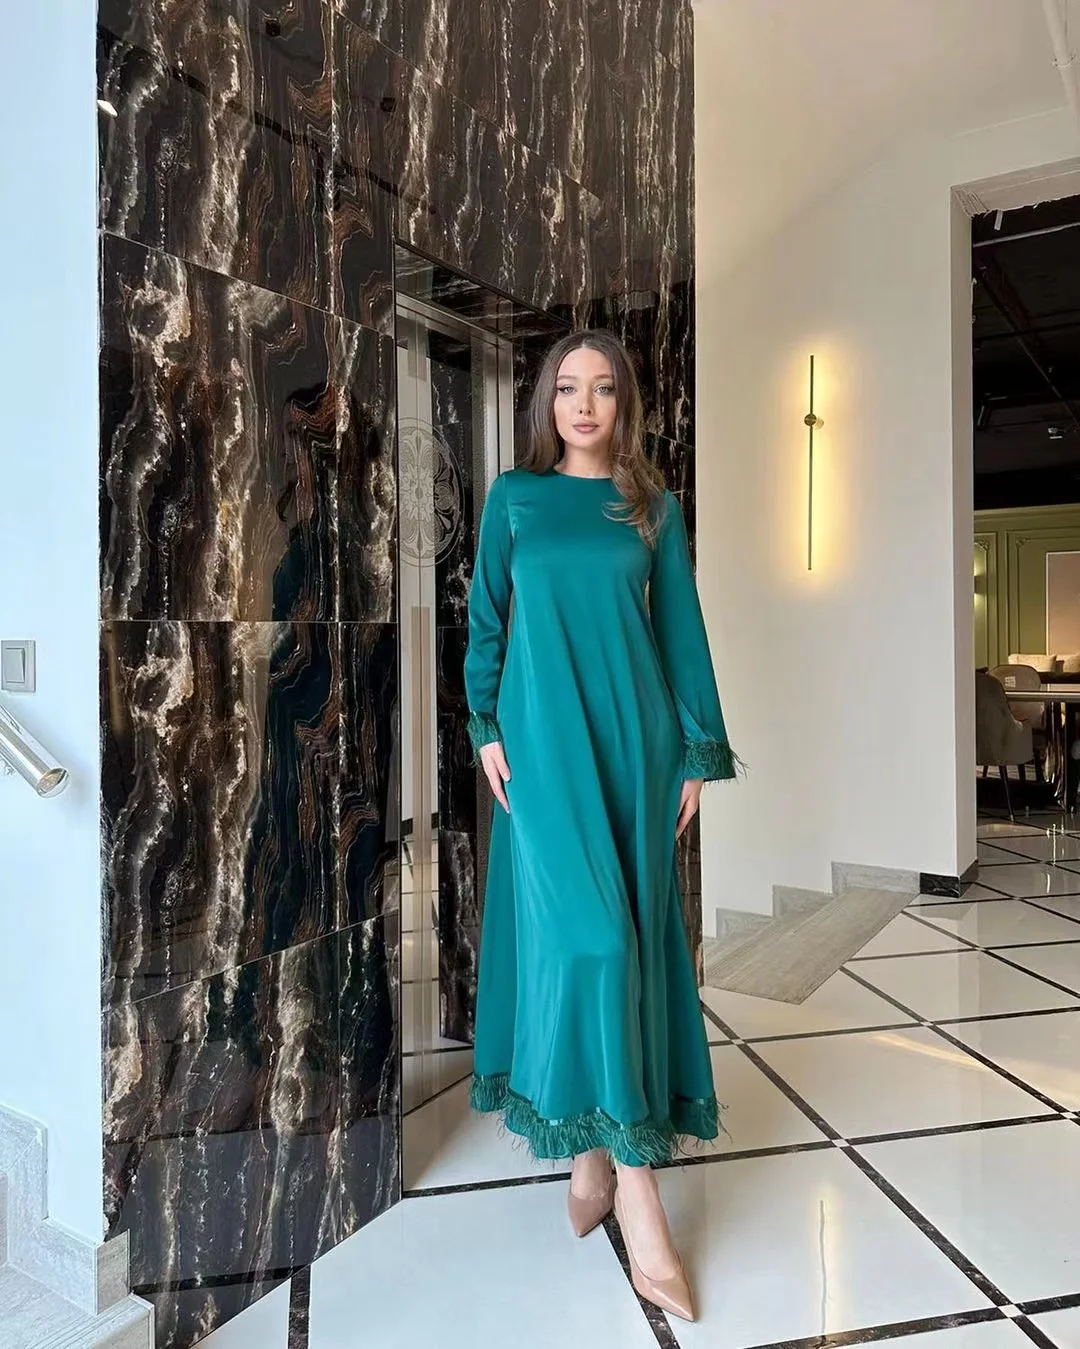 

Merida Green Feather Satin Evening Dresses Long Sleeves A-Line Sash Ankle-Length Elegant Party Dresses For Women 2023